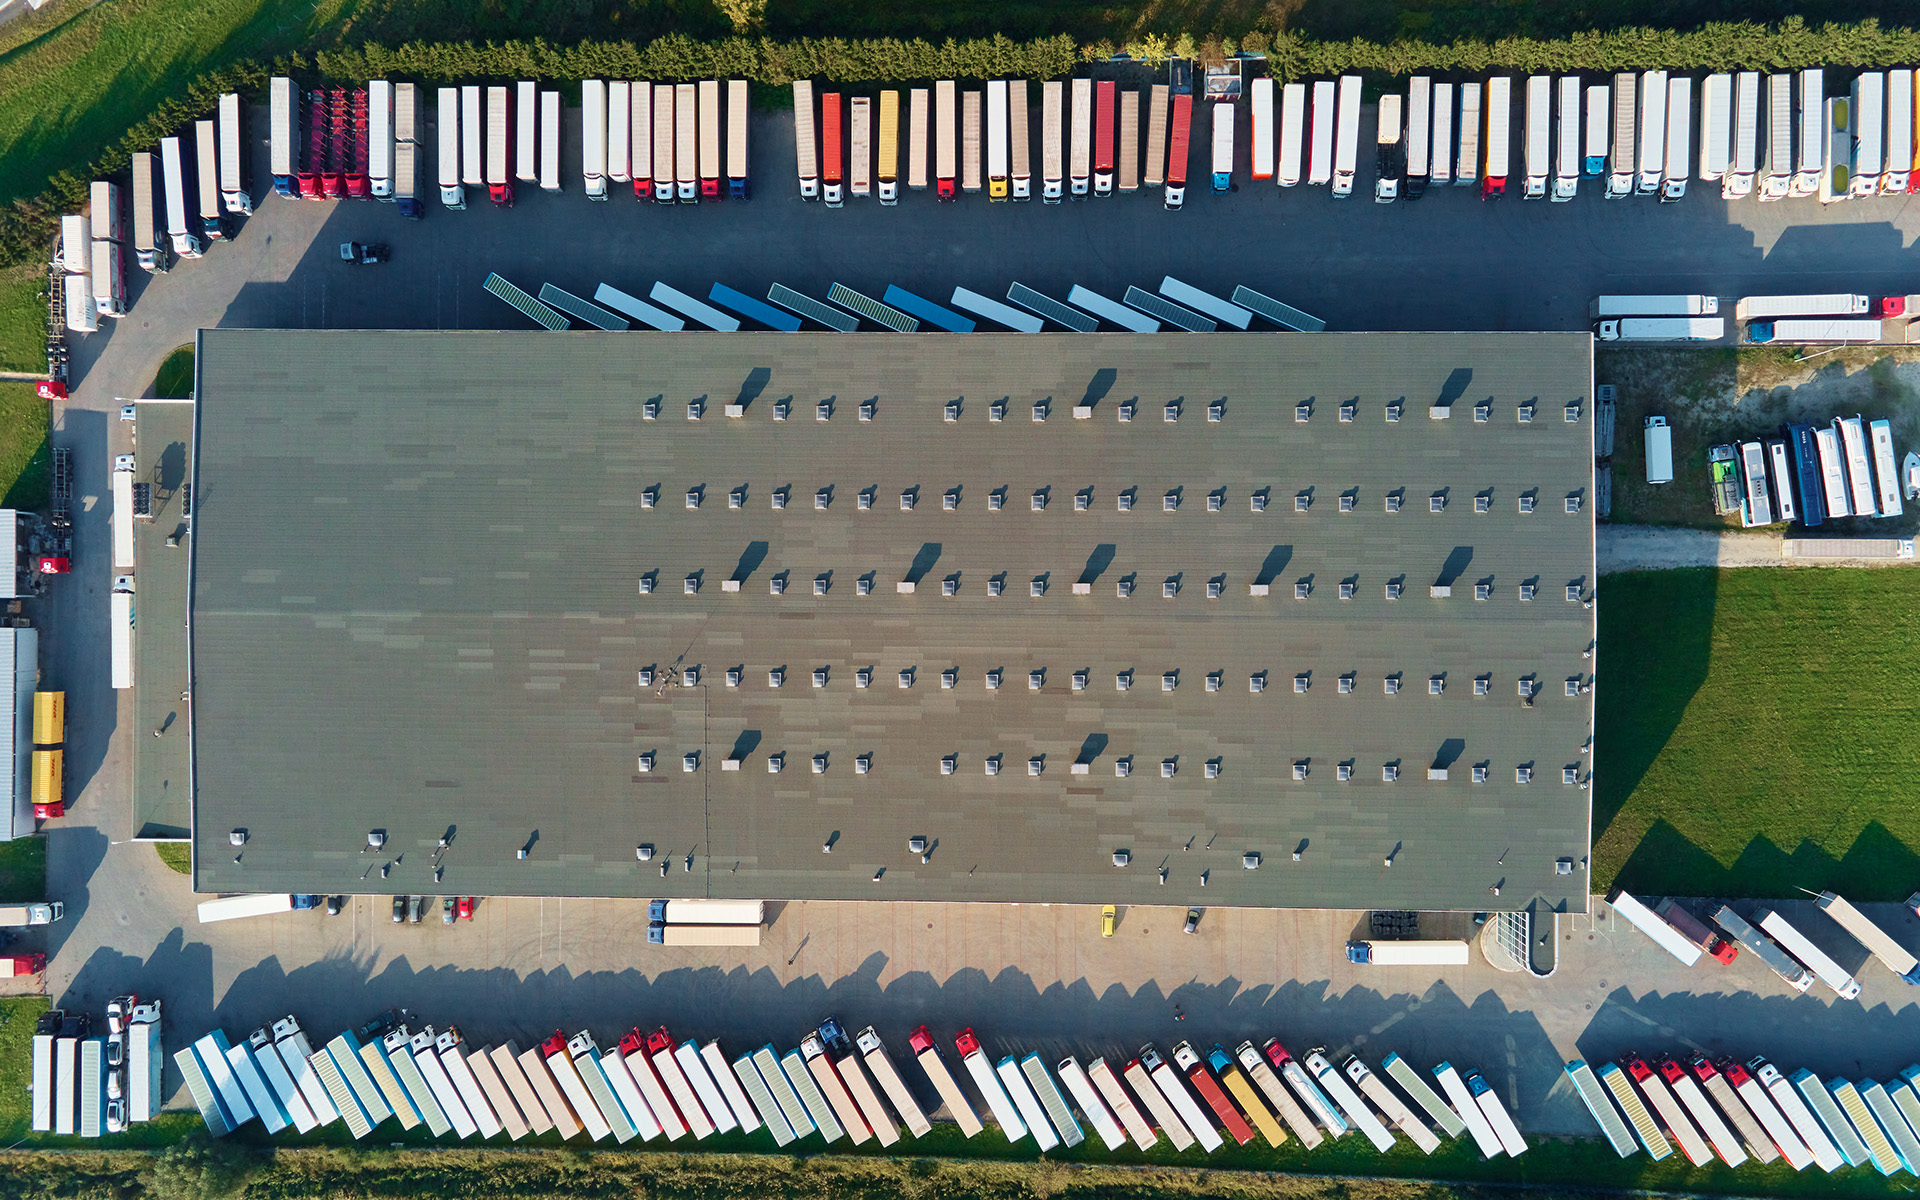 Parking lot for semi trucks near factory, top view. Aerial view of truck trailers parked for waiting loading on factory. Logistics and shipping